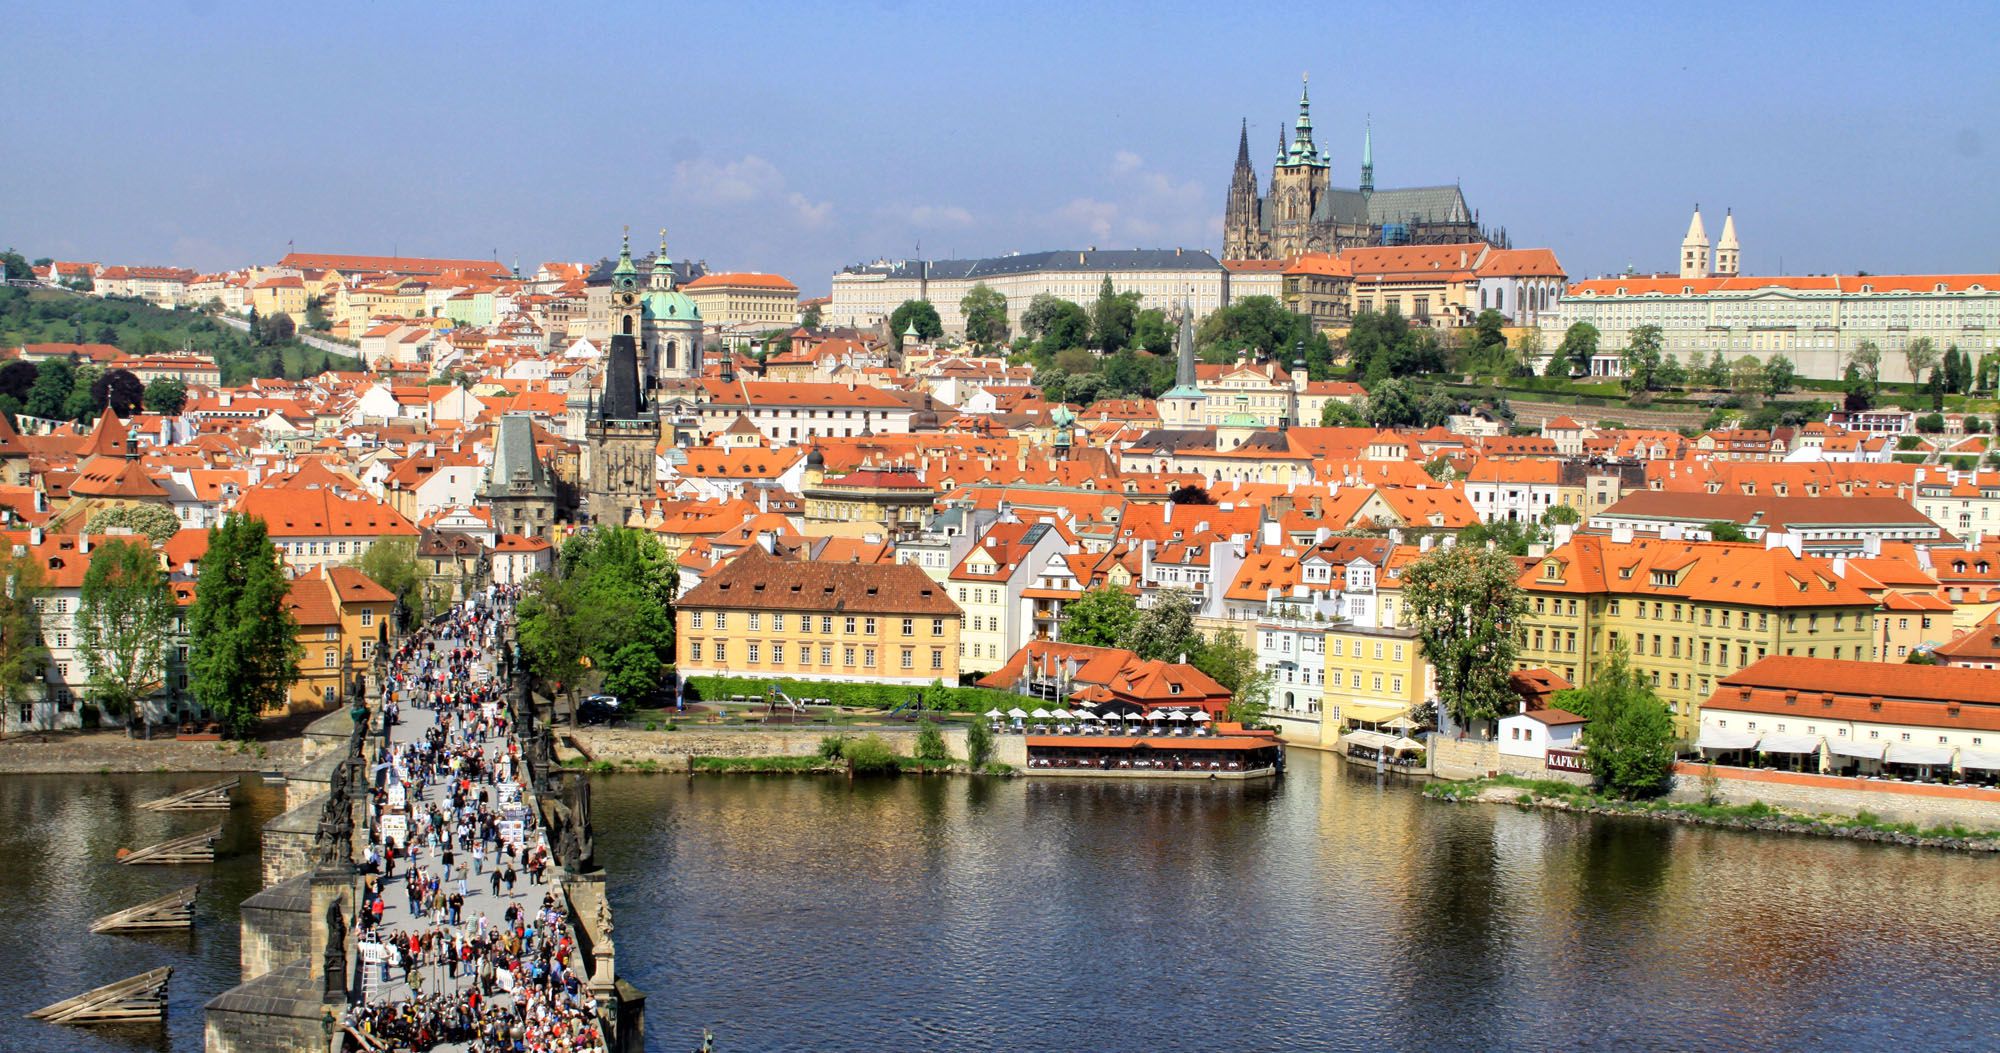 Which famous composer was born in Prague?